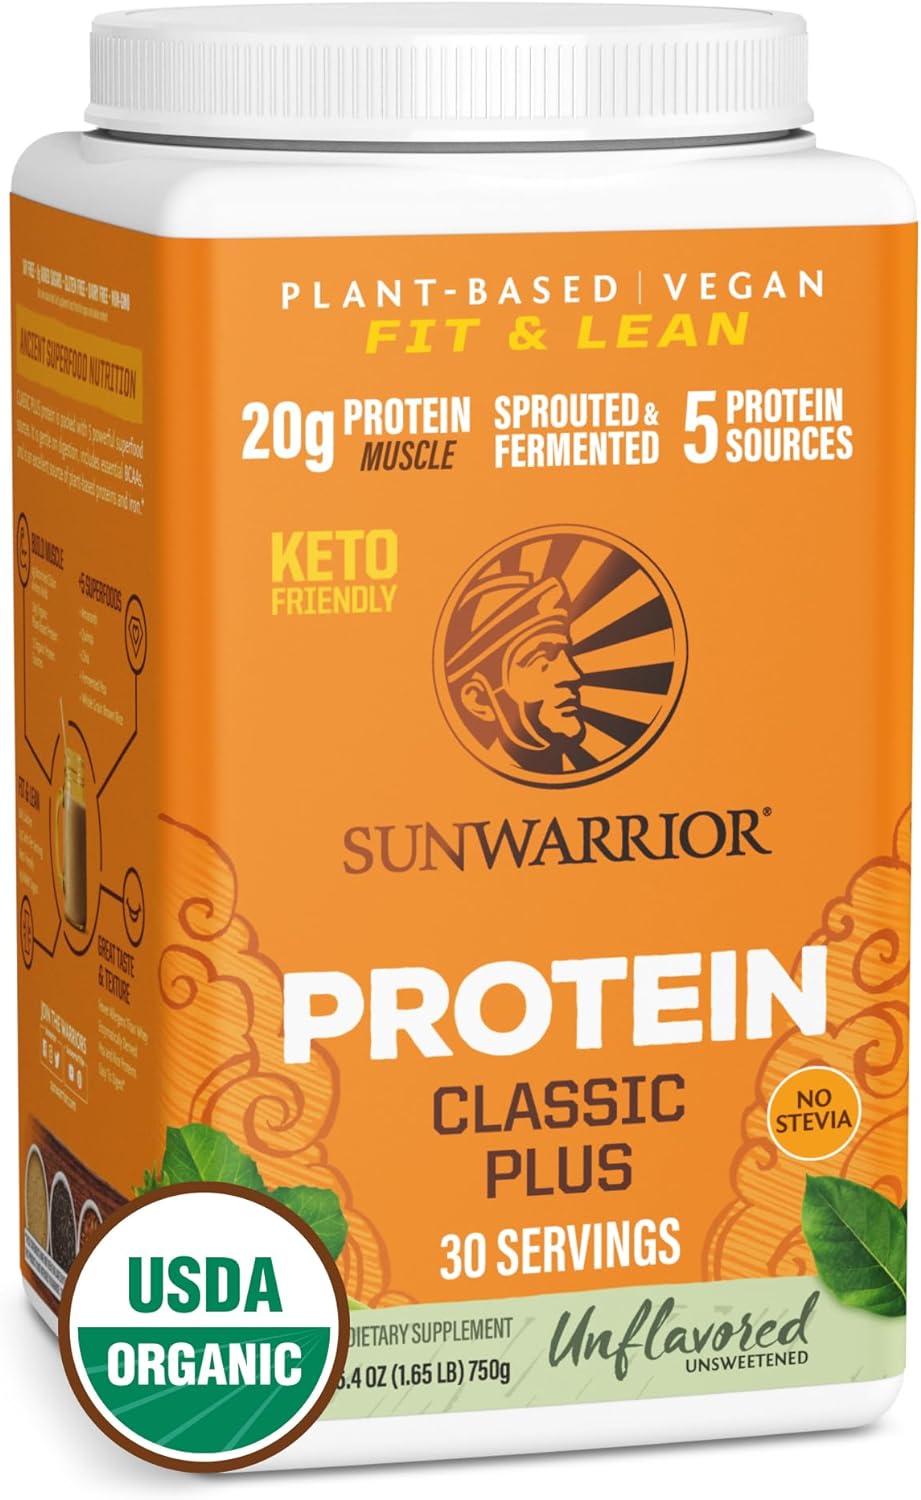 Vegan Organic Protein Powder Plant-based | 5 Superfood Quinoa Chia Seed Soy Free Dairy Free Gluten Free Synthetic Free NON-GMO | Unflavored 30 Servings | Classic Plus by Sunwarrior